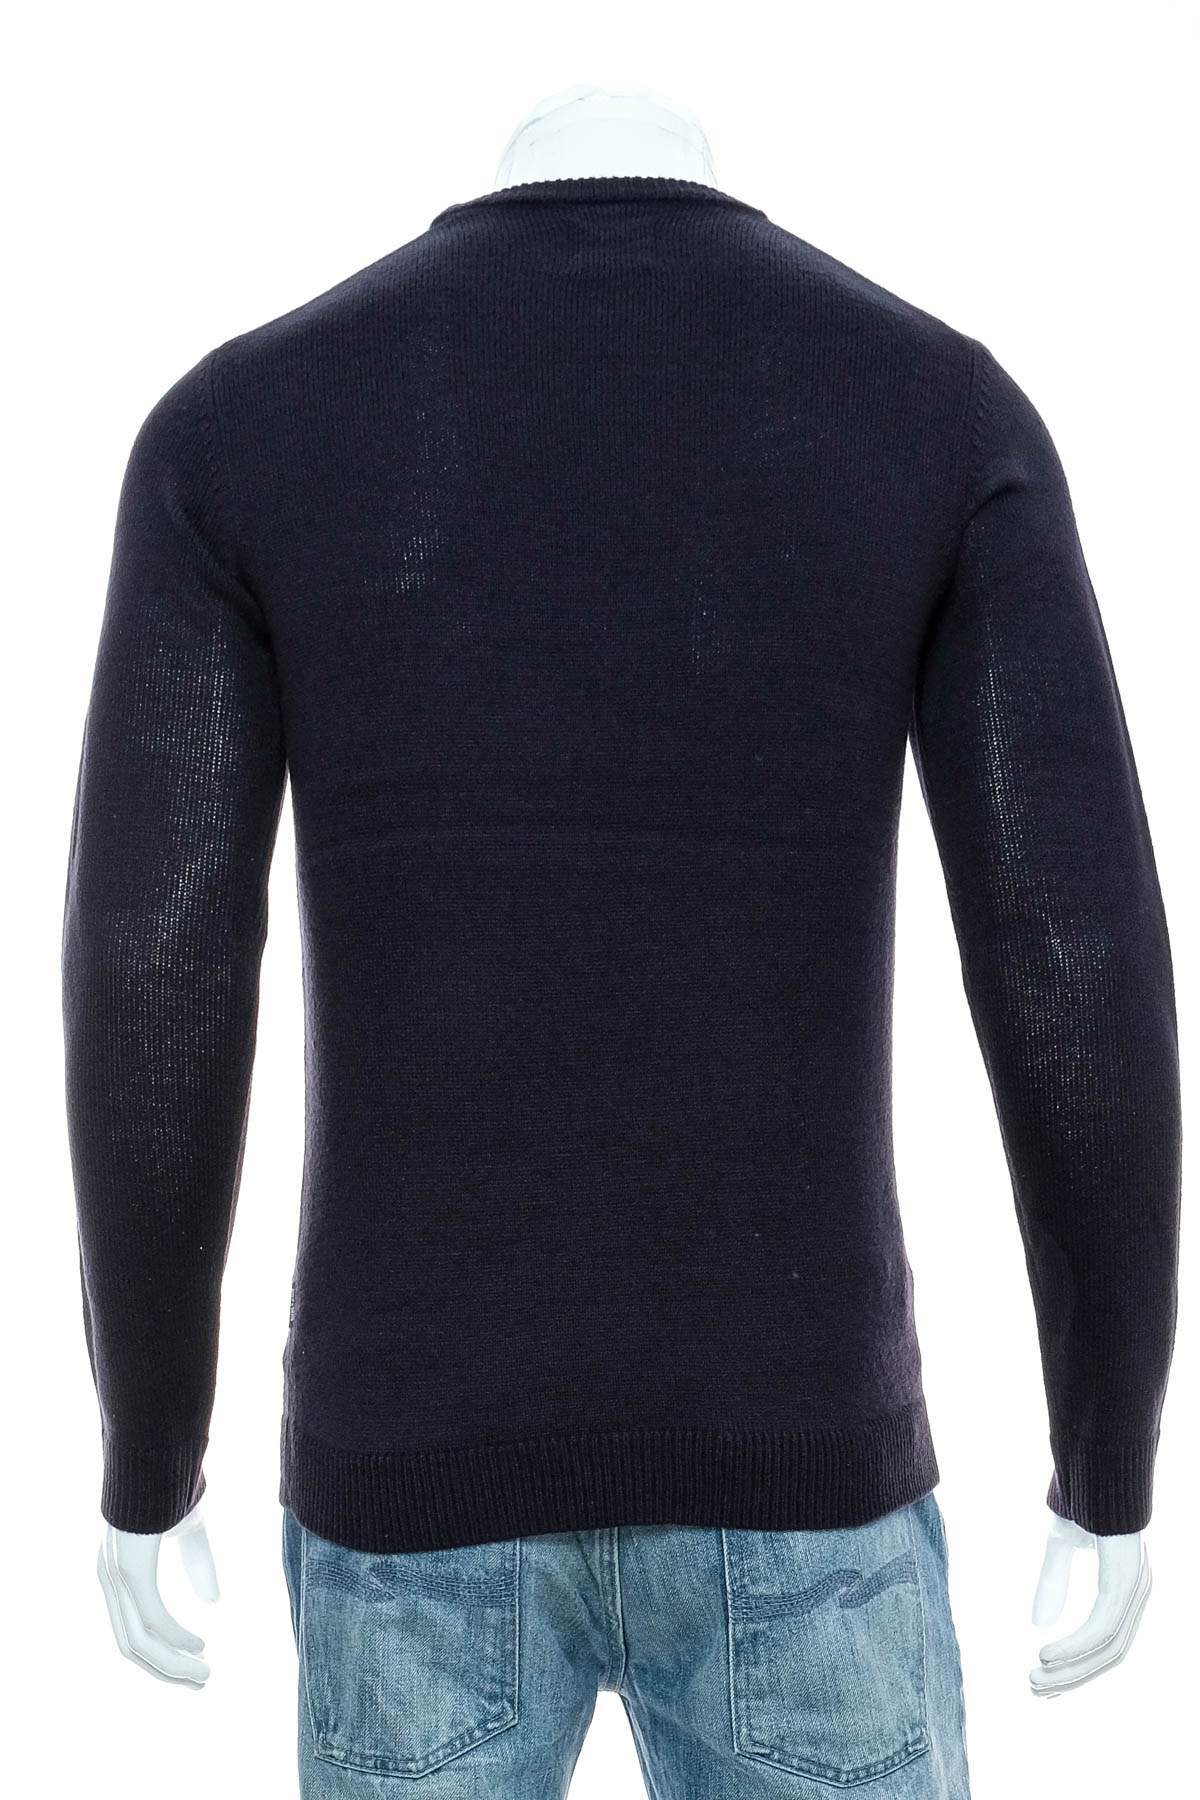 Men's sweater - ONLY & SONS - 1